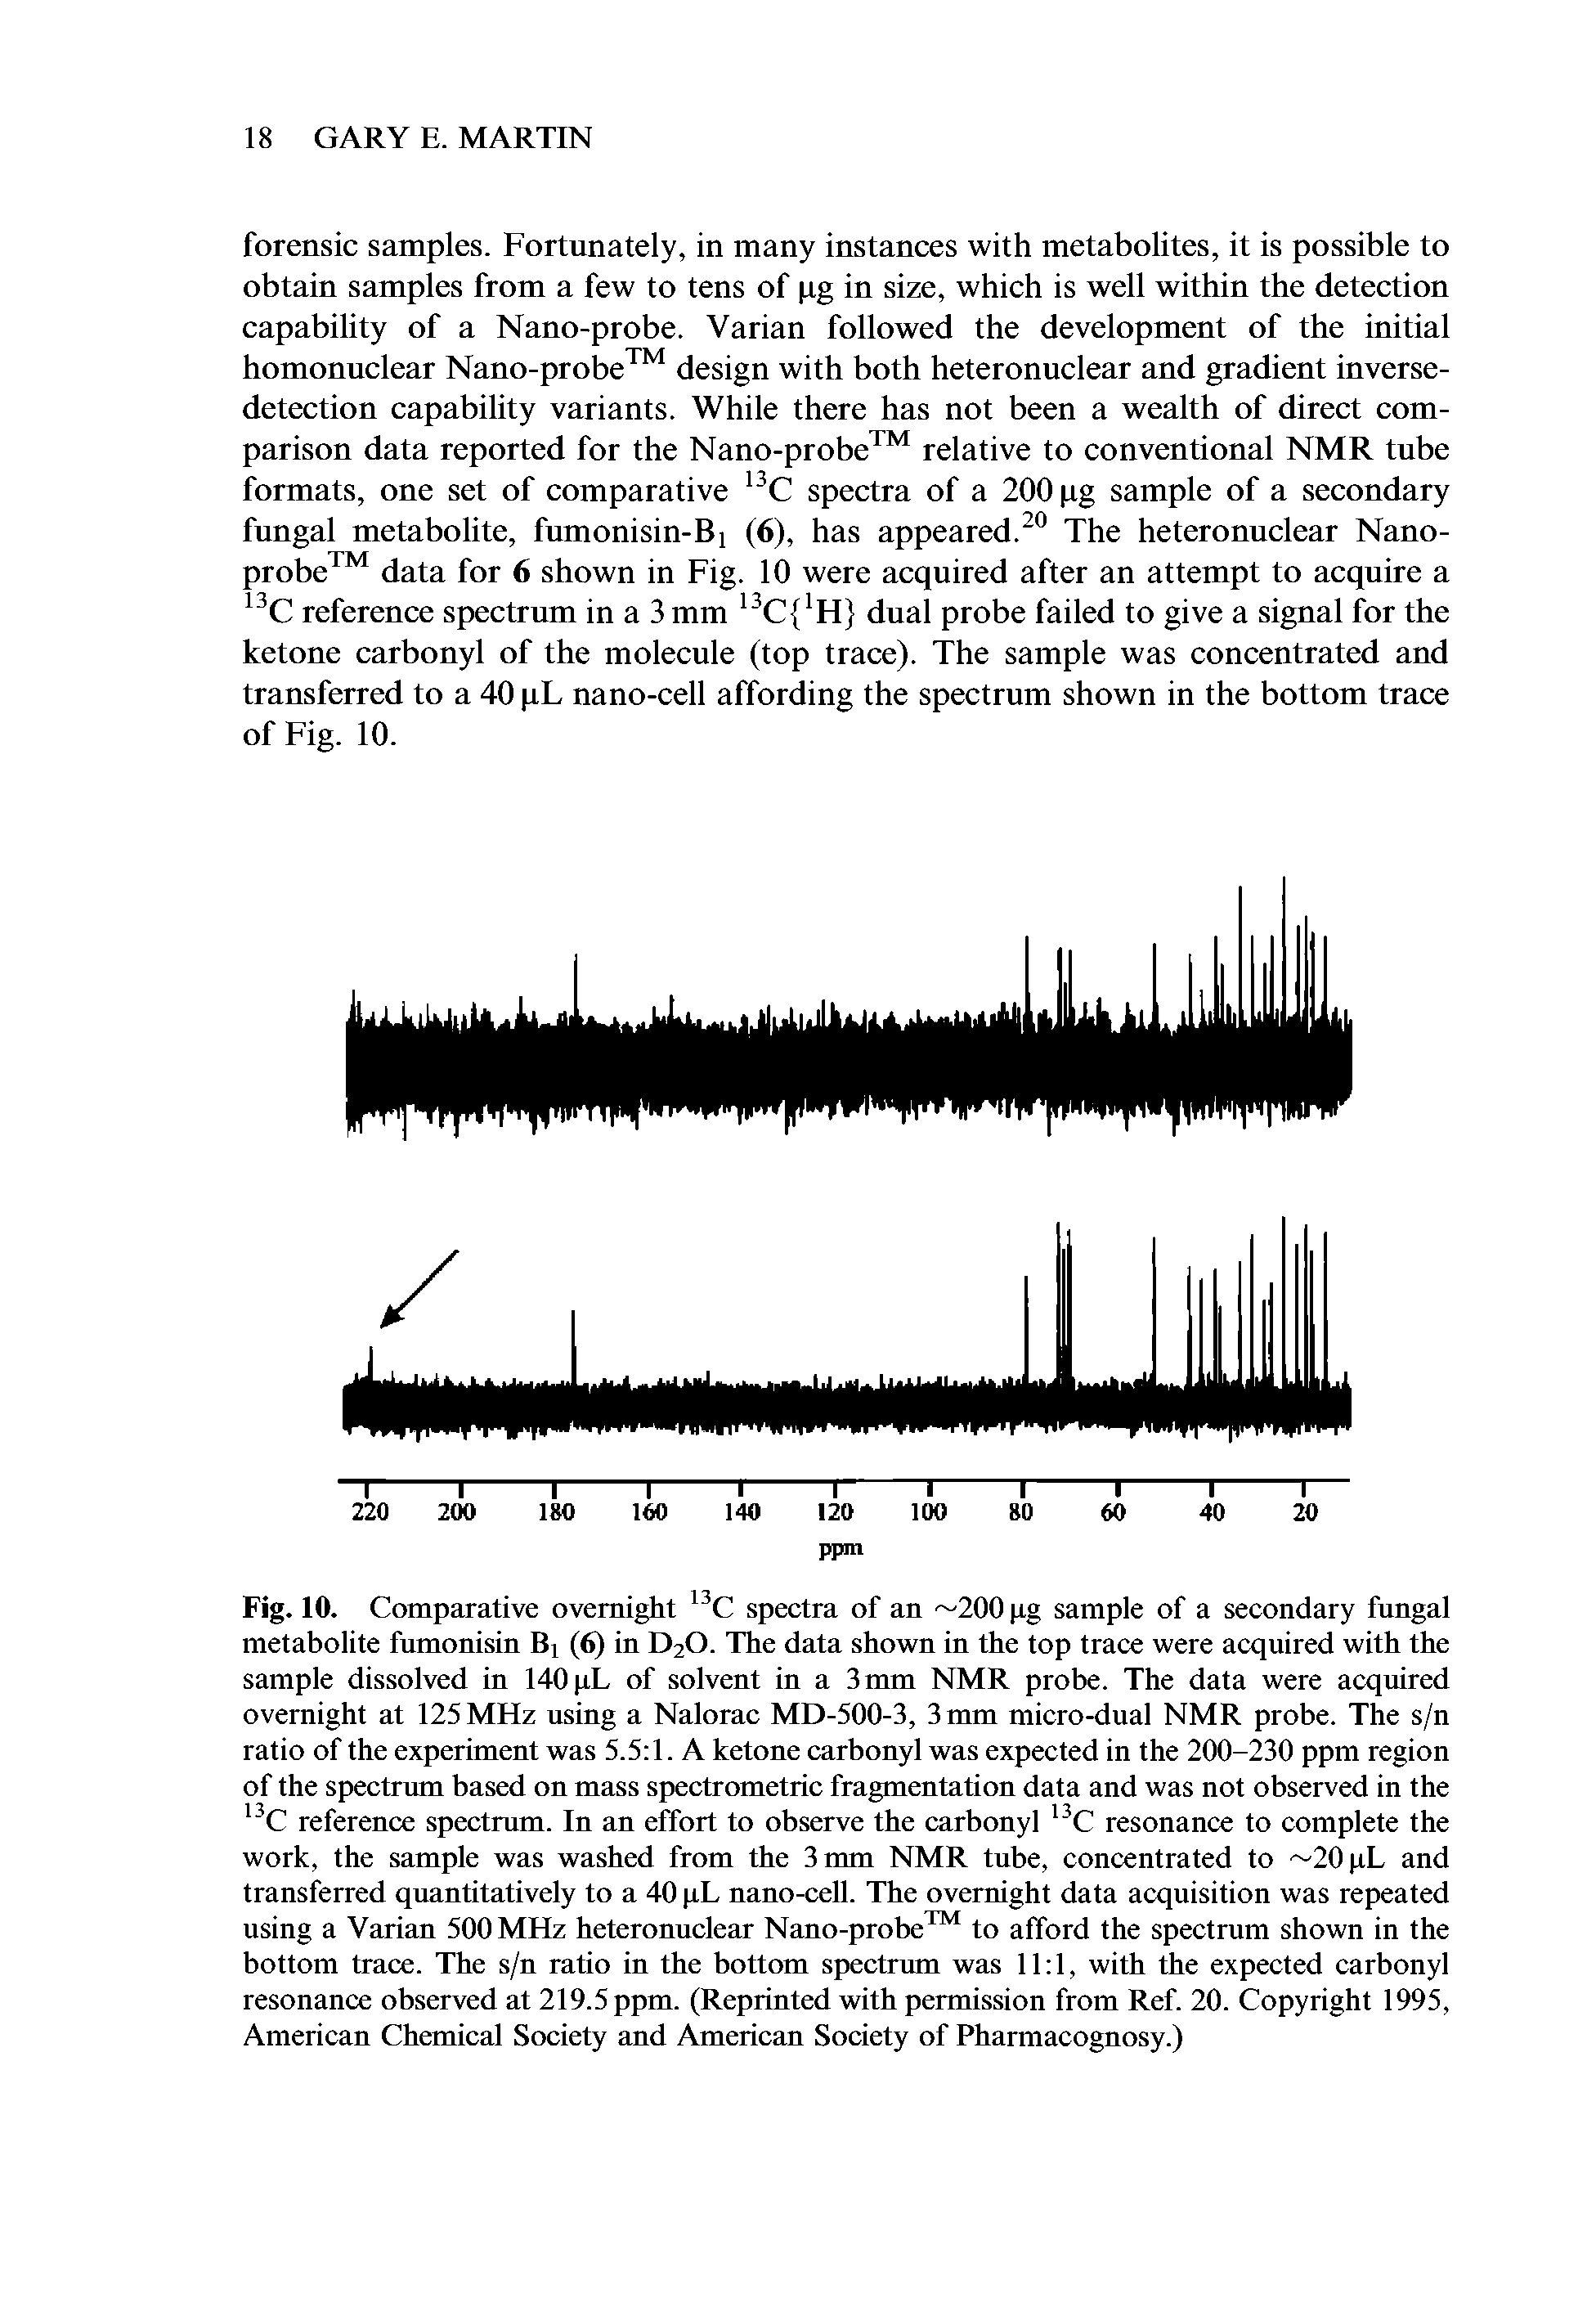 Fig. 10. Comparative overnight 13C spectra of an 200 pg sample of a secondary fungal metabolite fumonisin B (6) in D20. The data shown in the top trace were acquired with the sample dissolved in 140 pL of solvent in a 3 mm NMR probe. The data were acquired overnight at 125 MHz using a Nalorac MD-500-3, 3 mm micro-dual NMR probe. The s/n ratio of the experiment was 5.5 1. A ketone carbonyl was expected in the 200-230 ppm region of the spectrum based on mass spectrometric fragmentation data and was not observed in the 13C reference spectrum. In an effort to observe the carbonyl 13C resonance to complete the work, the sample was washed from the 3 mm NMR tube, concentrated to 20pL and transferred quantitatively to a 40 pL nano-cell. The overnight data acquisition was repeated using a Varian 500 MHz heteronuclear Nano-probe to afford the spectrum shown in the bottom trace. The s/n ratio in the bottom spectrum was 11 1, with the expected carbonyl resonance observed at 219.5 ppm. (Reprinted with permission from Ref. 20. Copyright 1995, American Chemical Society and American Society of Pharmacognosy.)...